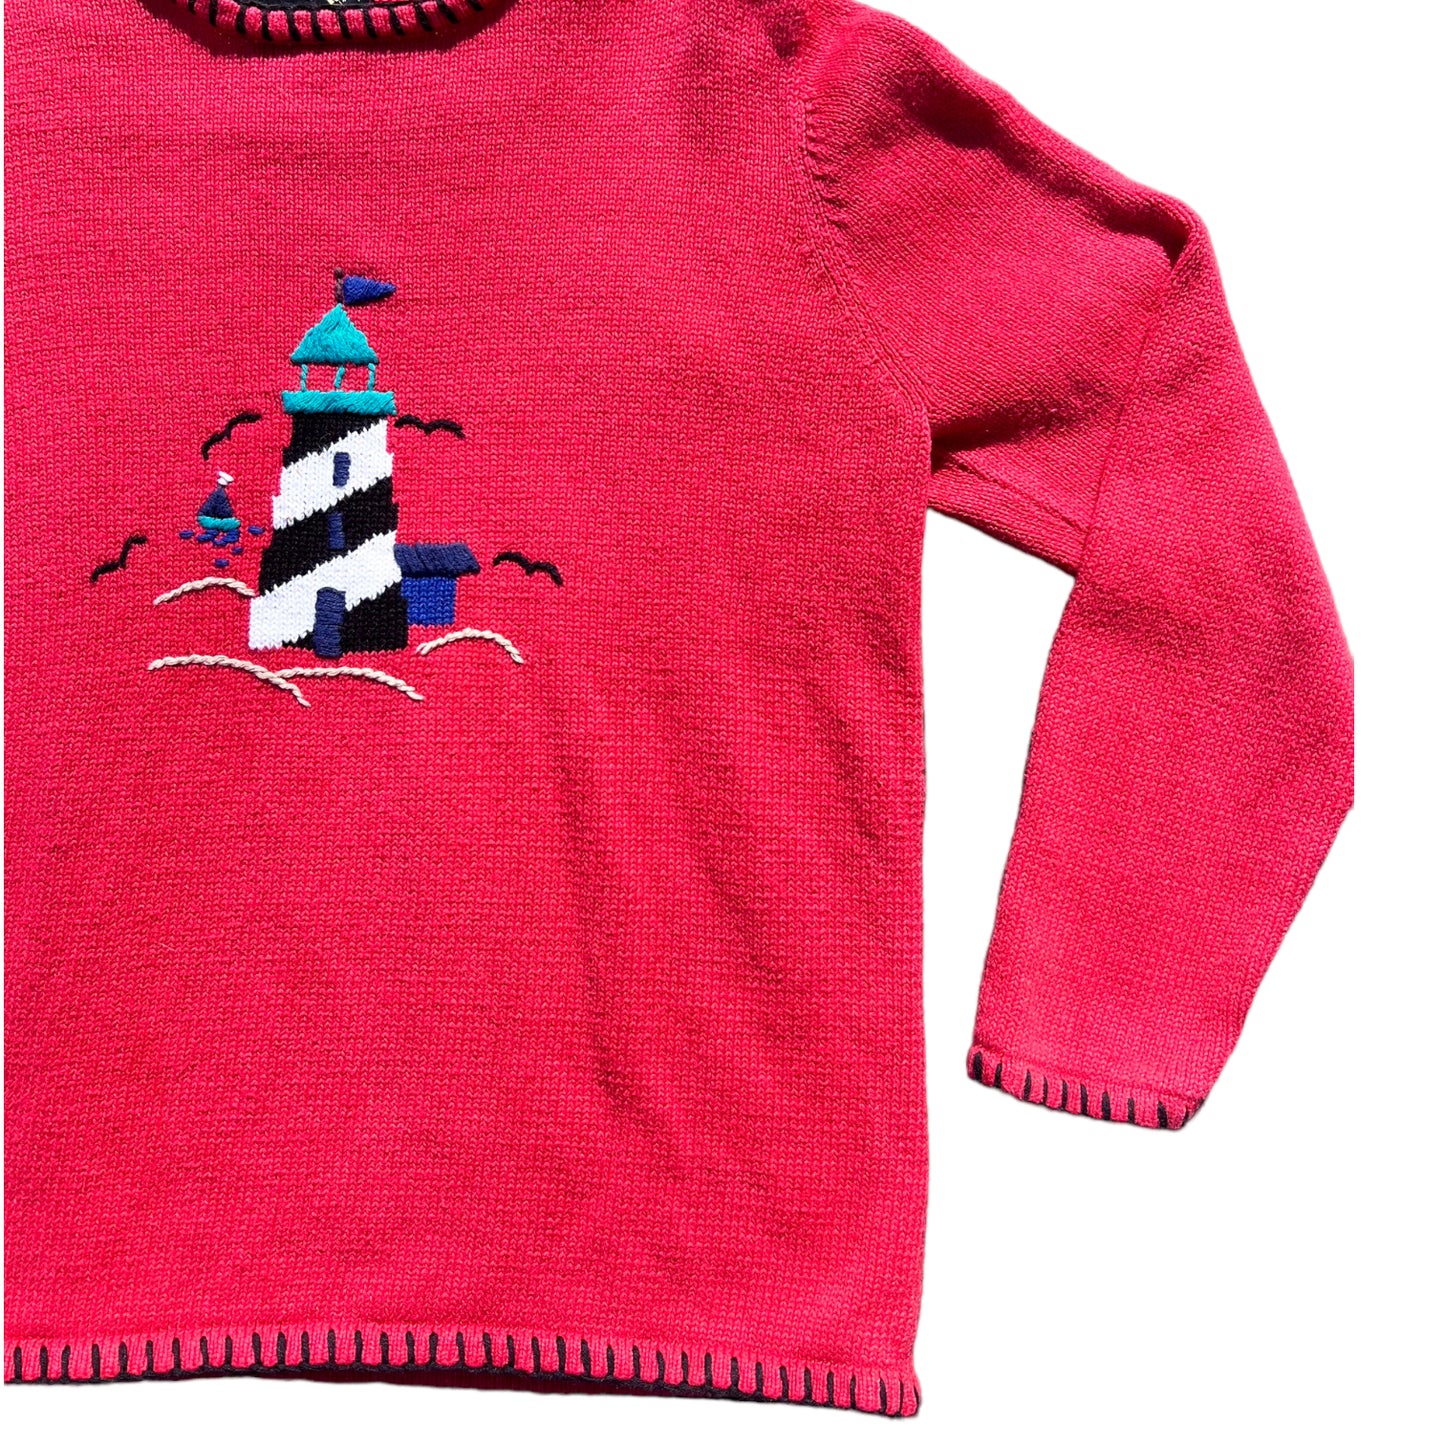 Knitted Lighthouse Sweater (M)